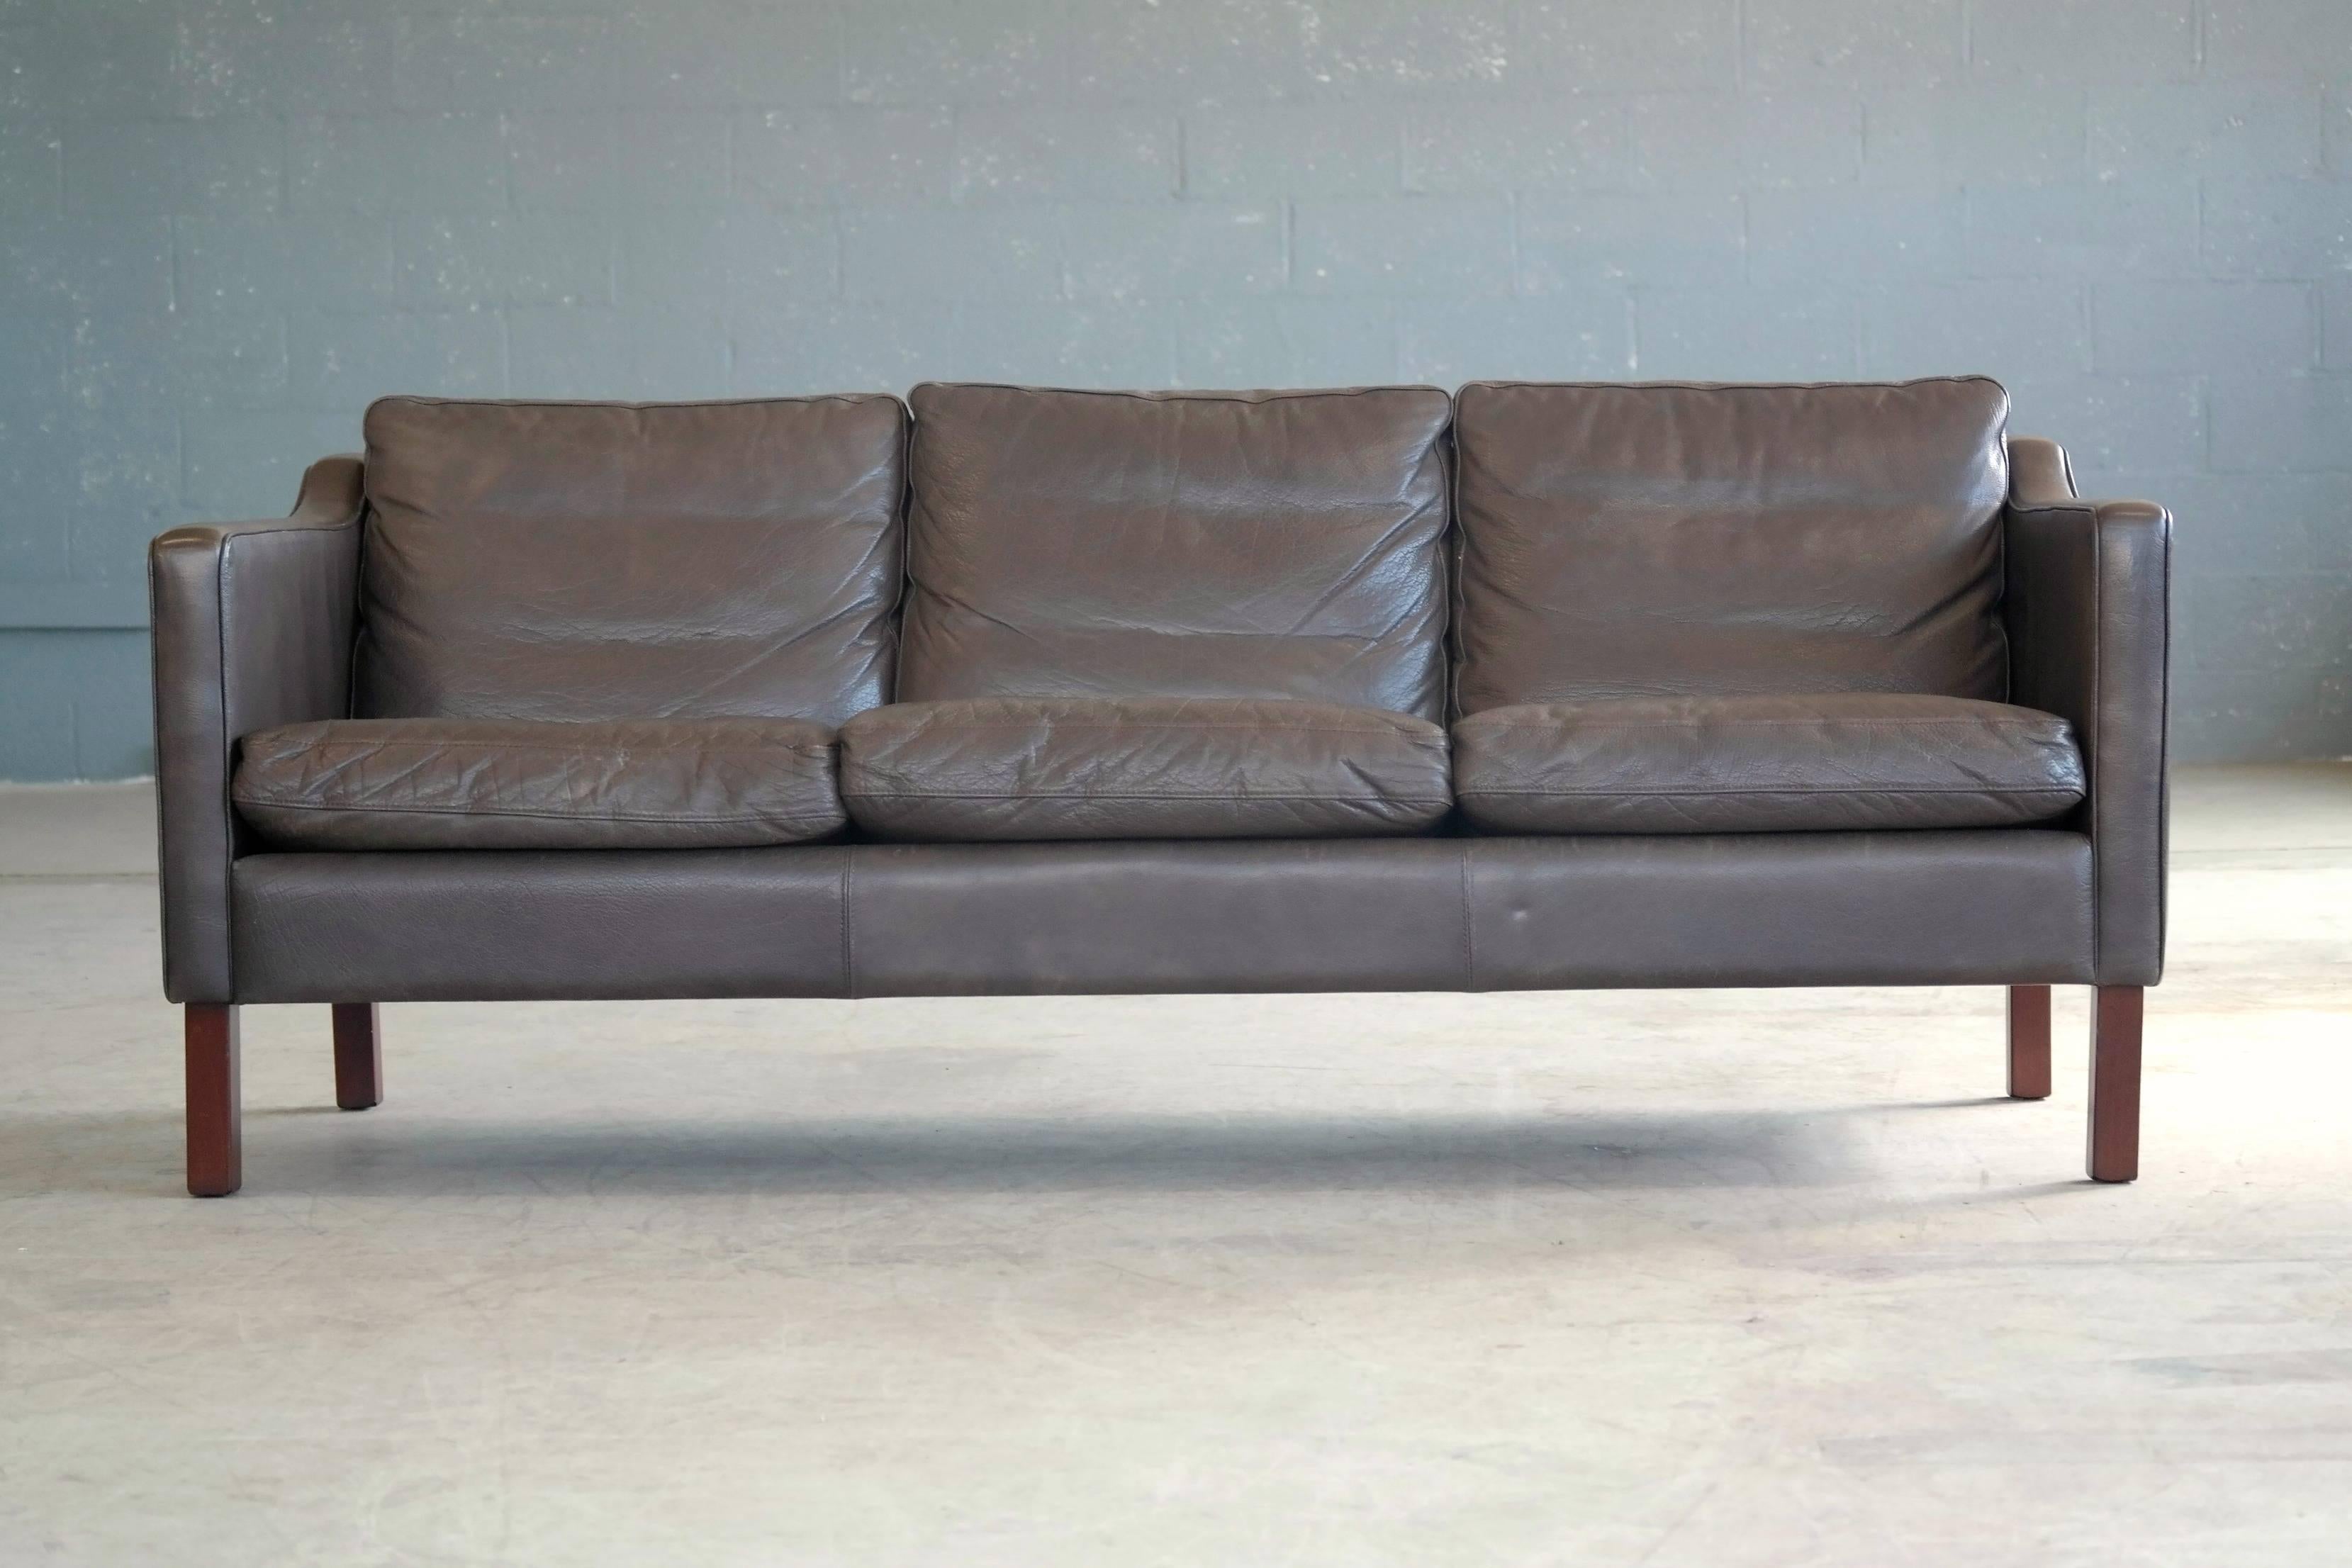 Classic Børge Mogensen style sofa from the late 1960s by Mogens Hansen. The epitome of Danish modern elegance. Nice color and great patina. Down filled cushions. Overall very good condition.